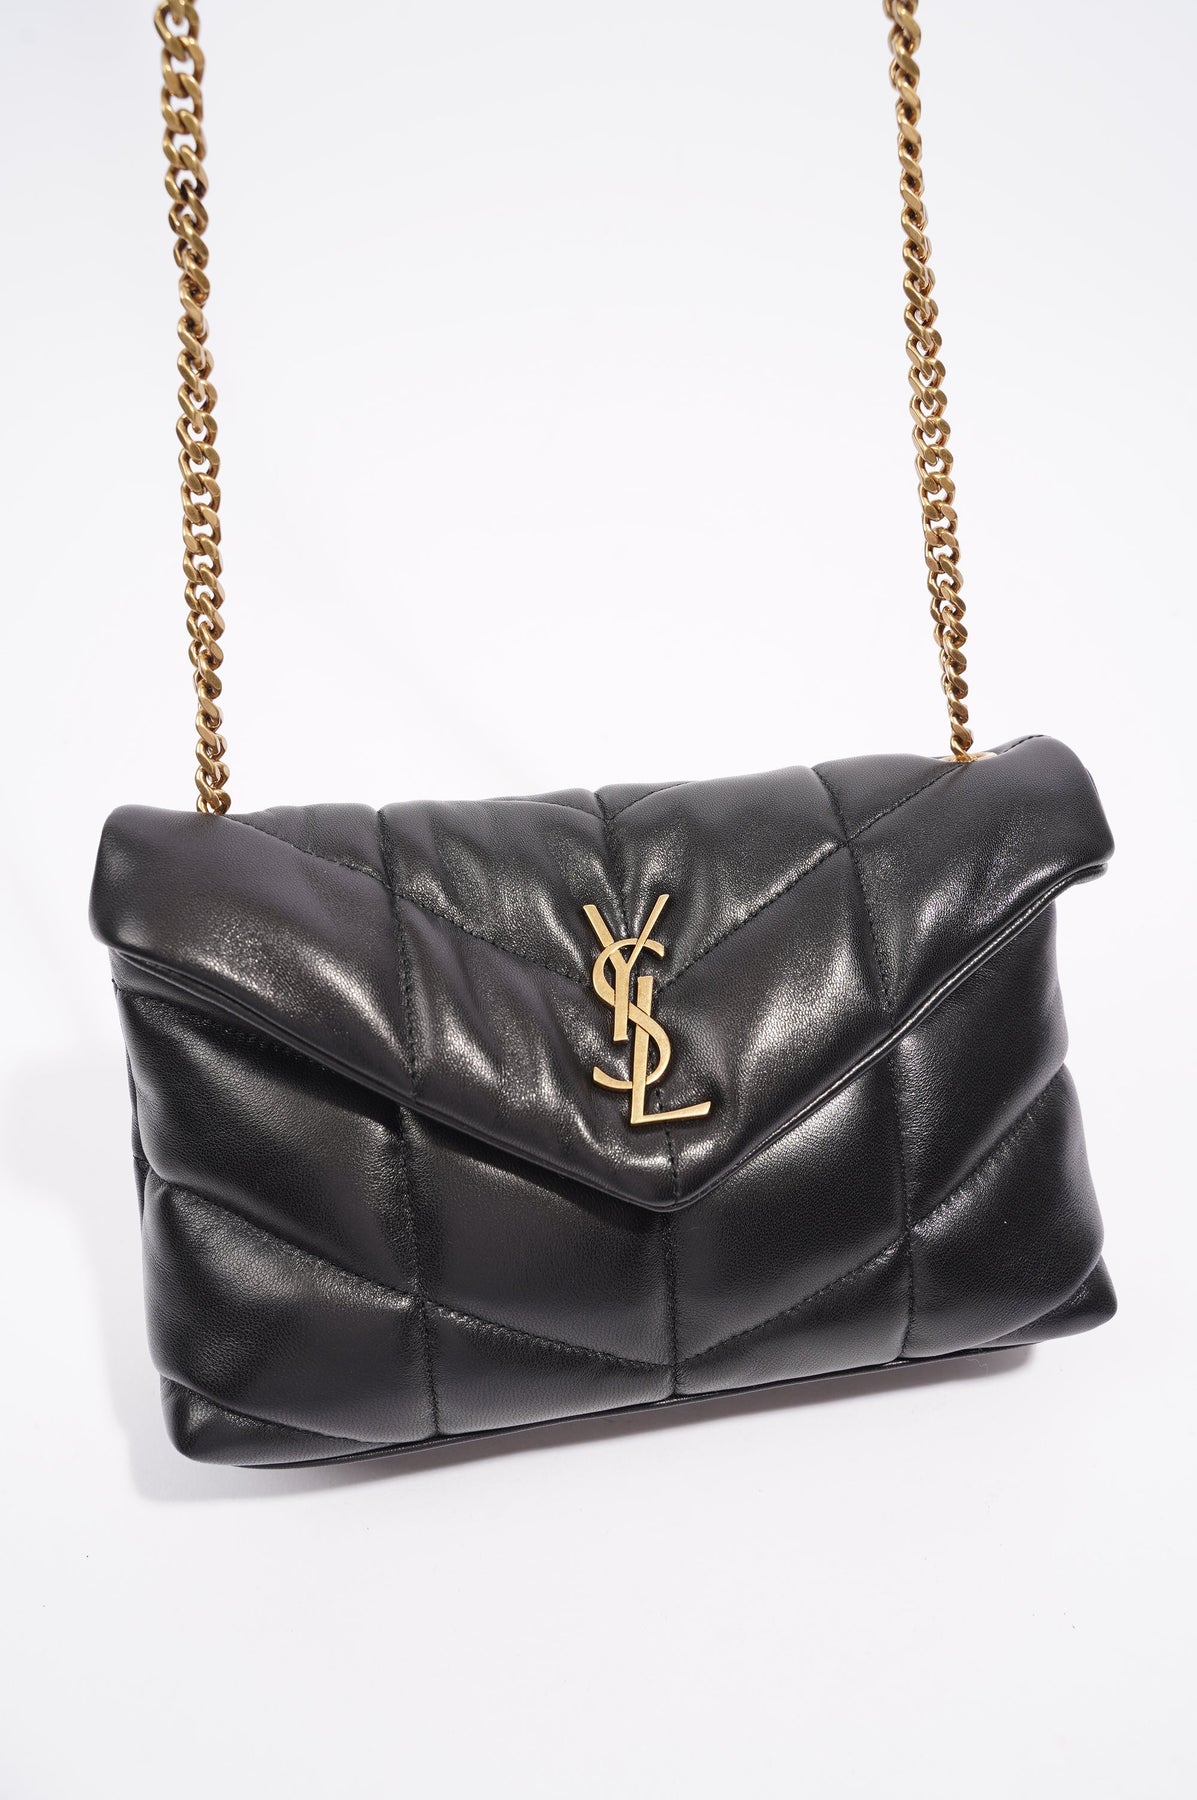 And How Will You Wear Saint Laurent's Babylone Bag?